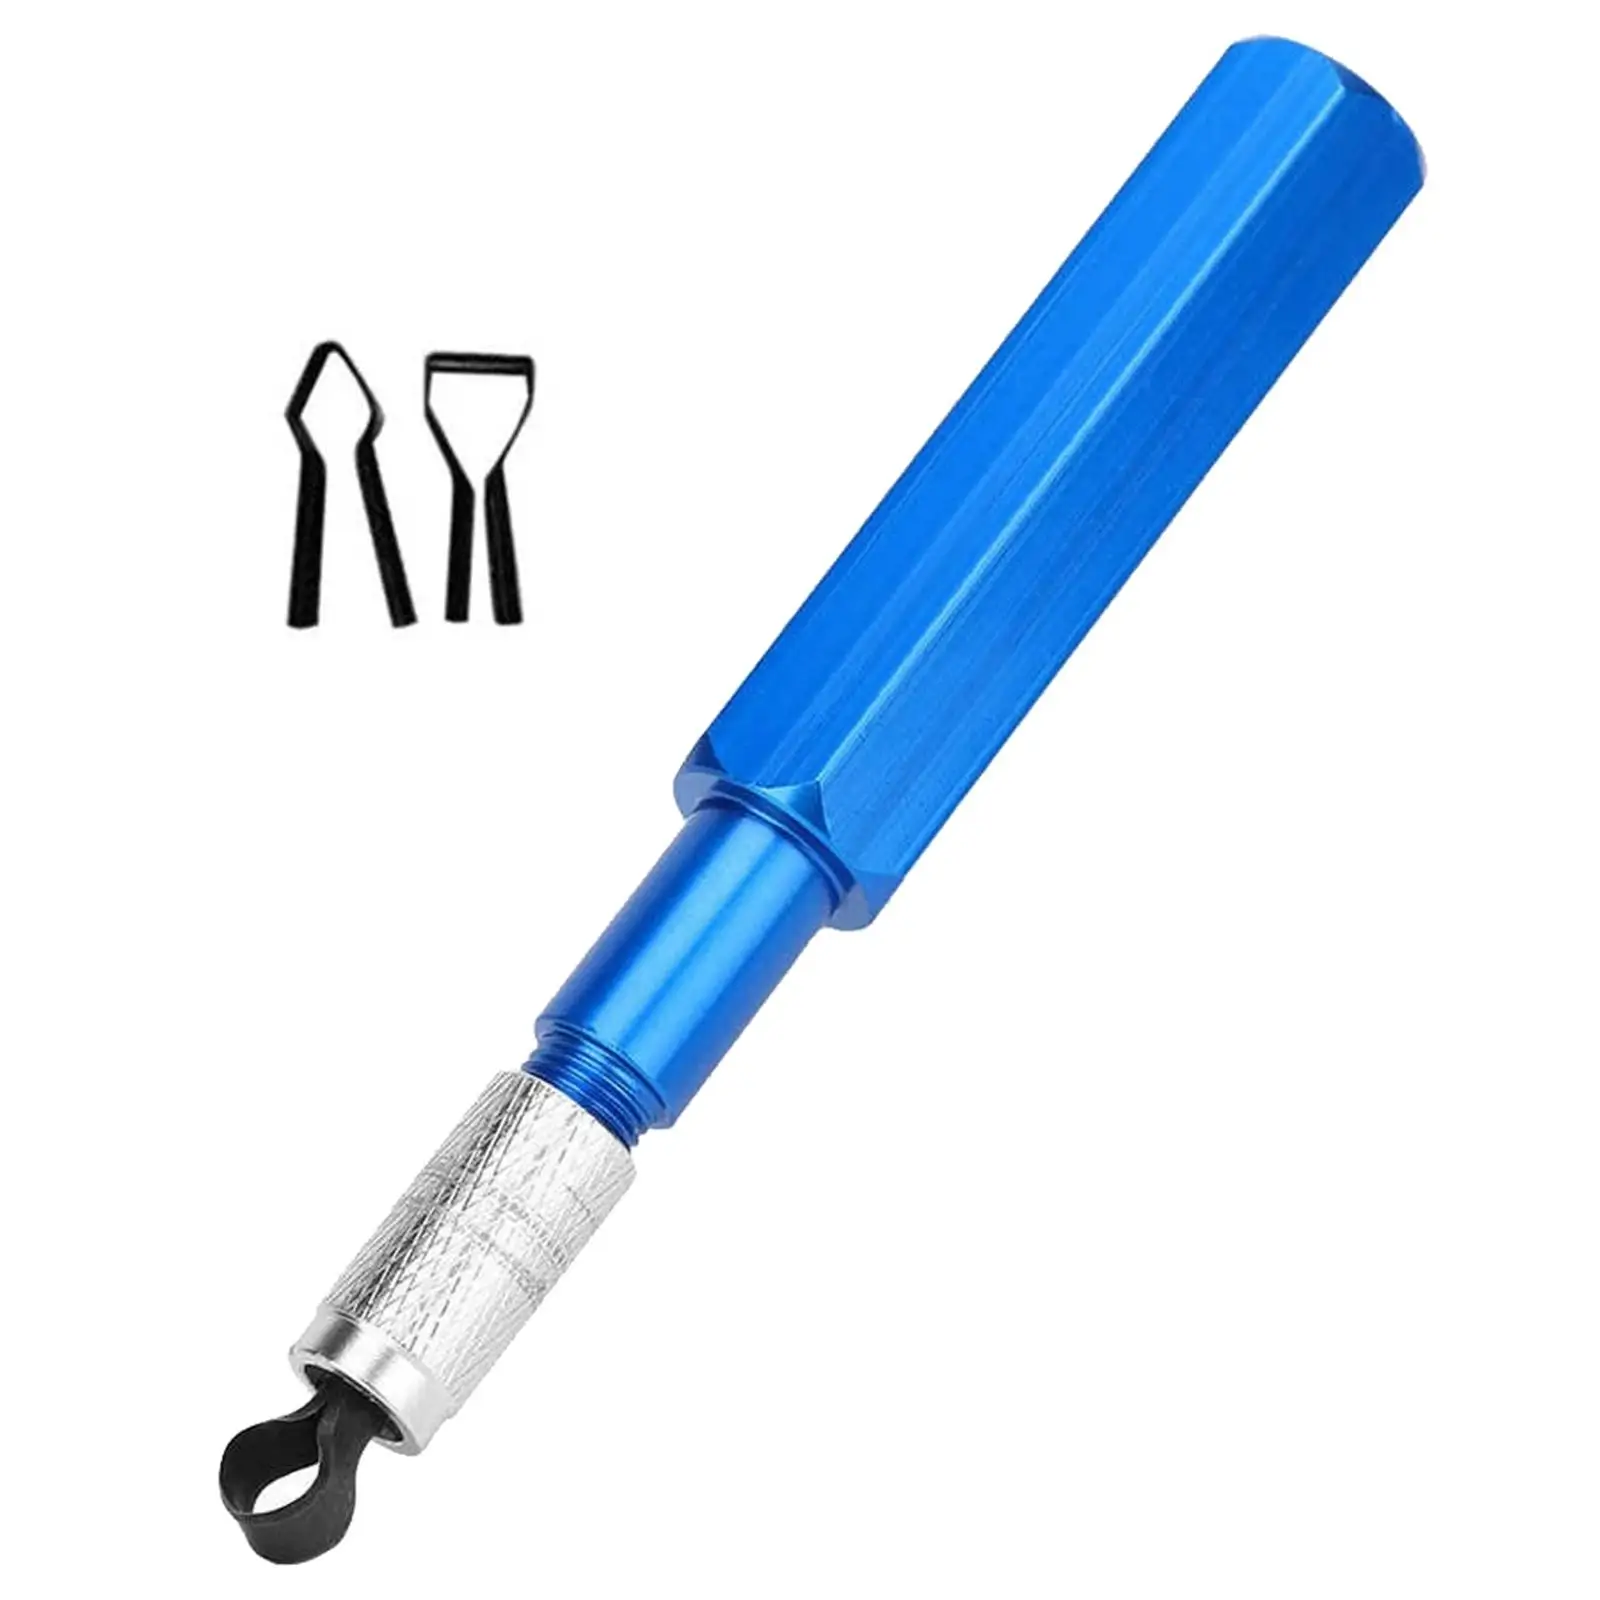 Floor Welding Tools Trimming Leveling Flanging Flooring Skiving Knive Construction Industrial Supplies with Spare Blade